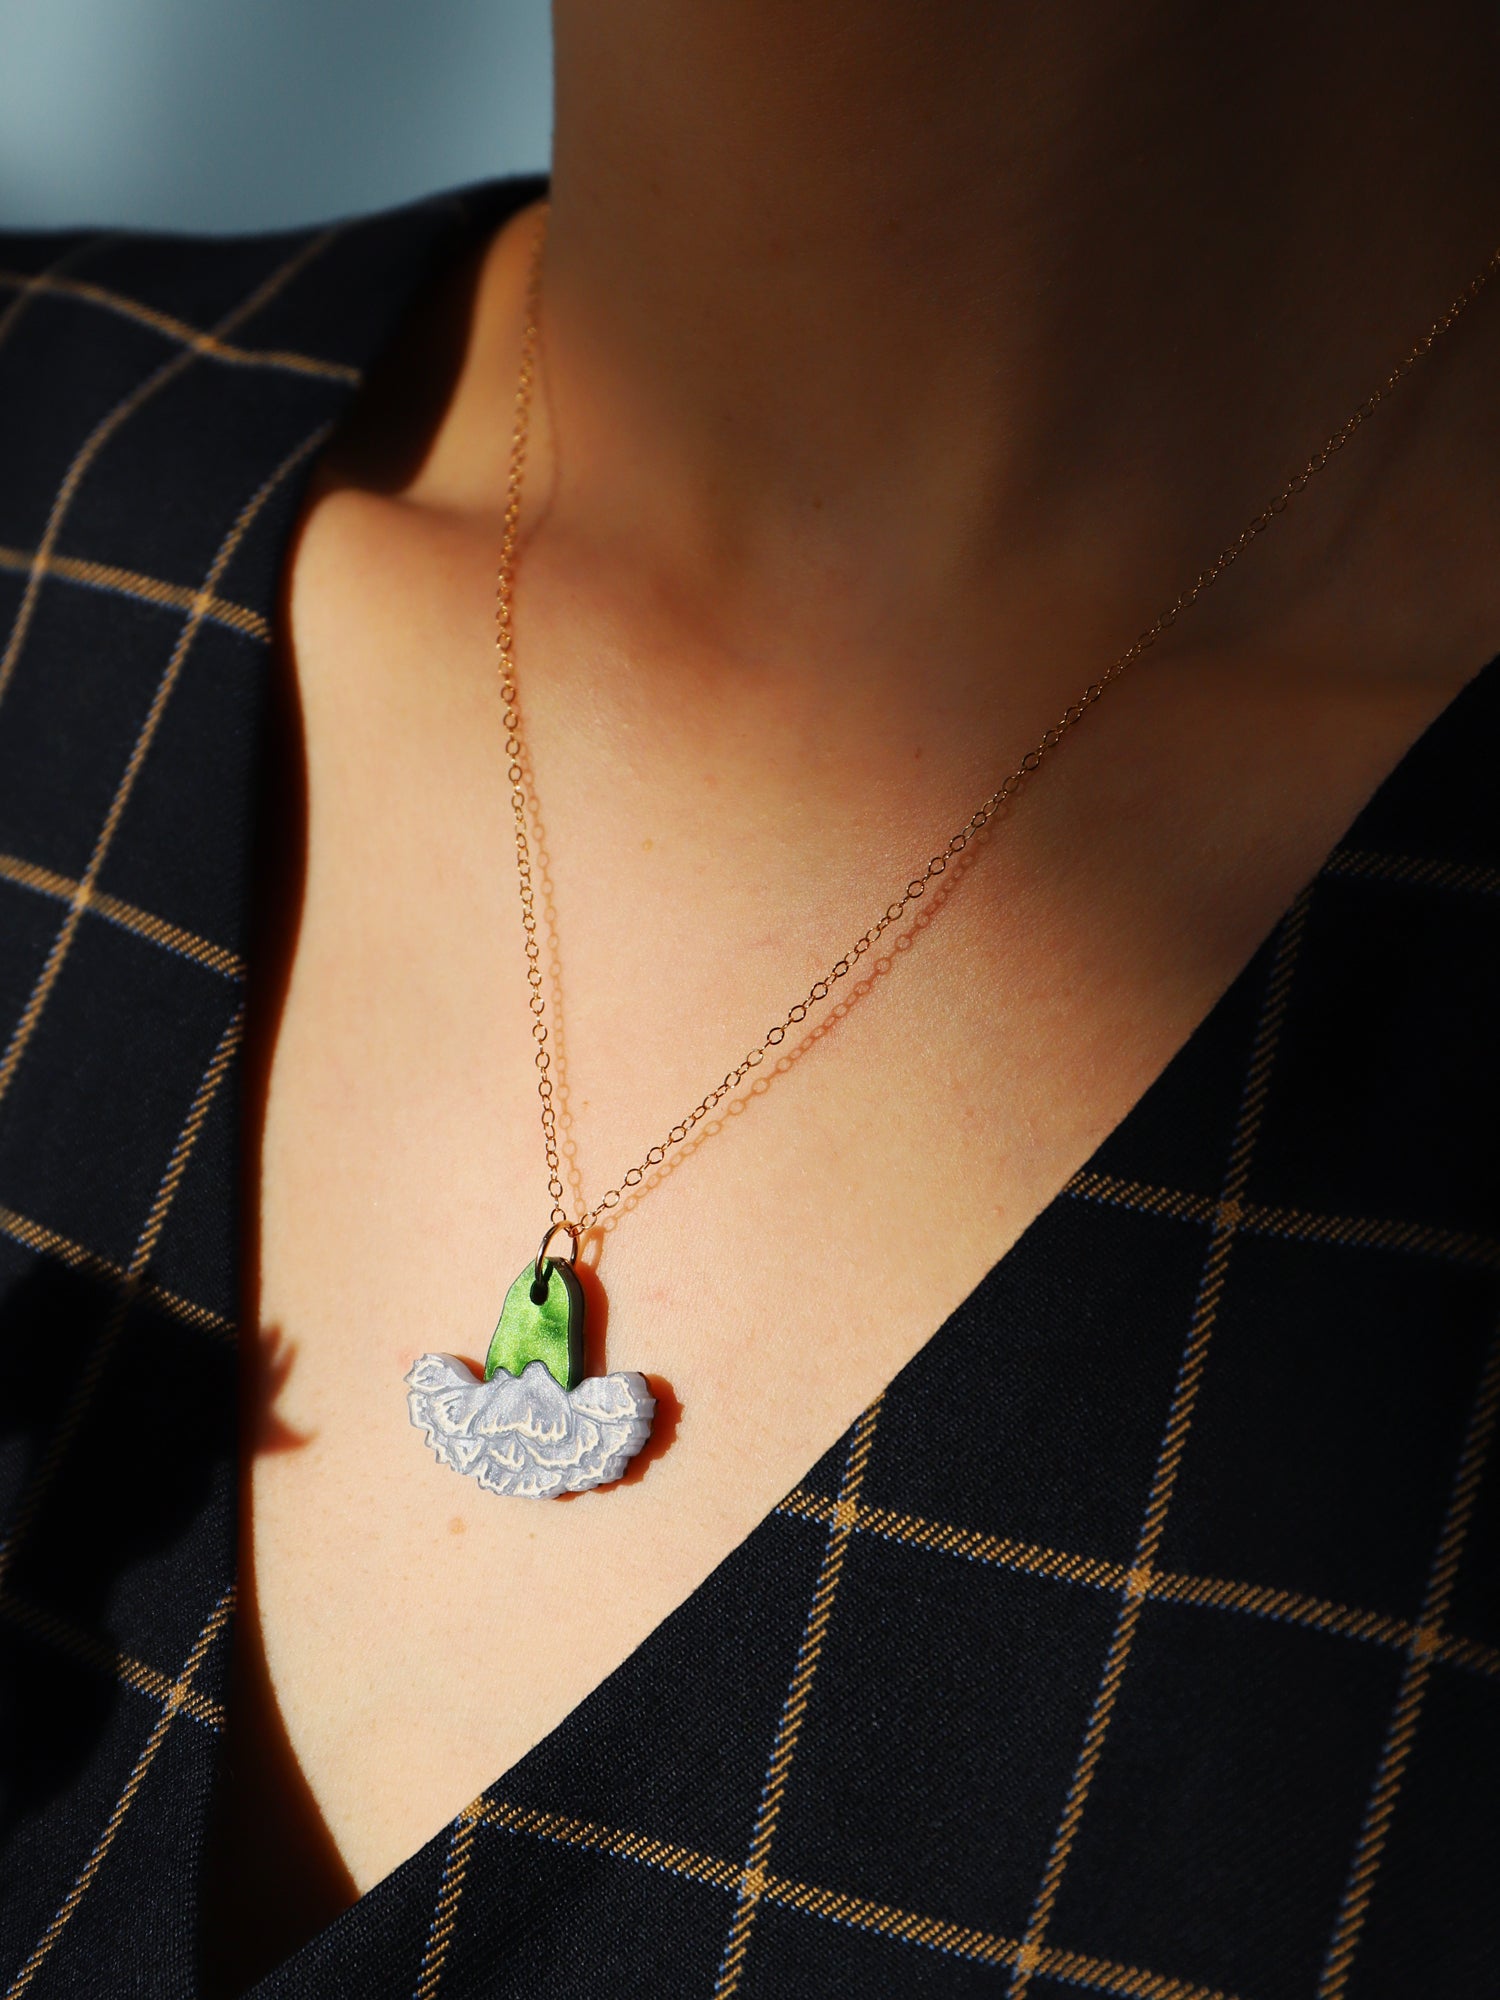 Carnation Necklace in Blue/White